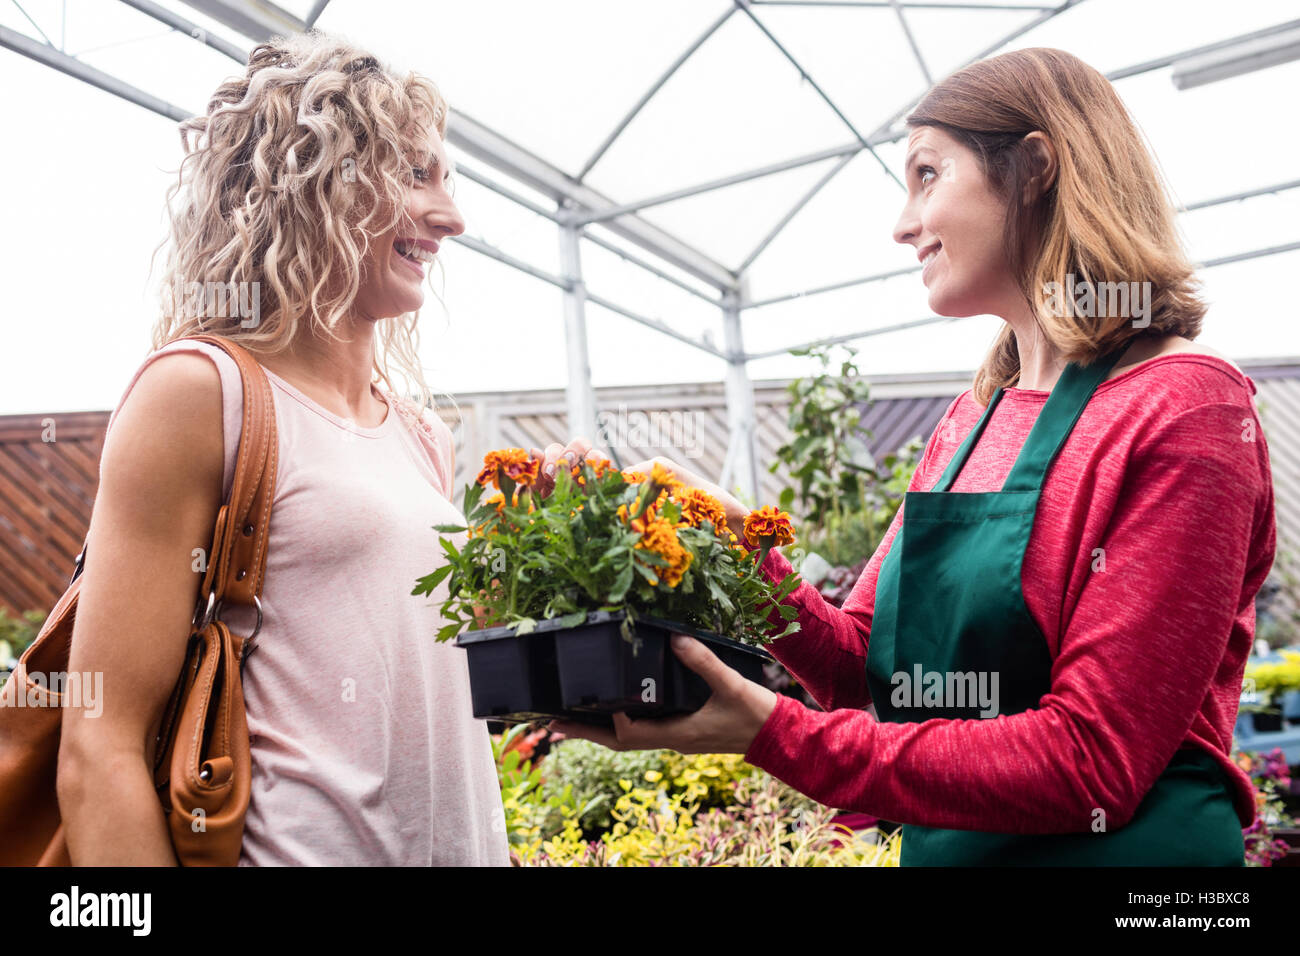 Woman buying potted plants Stock Photo